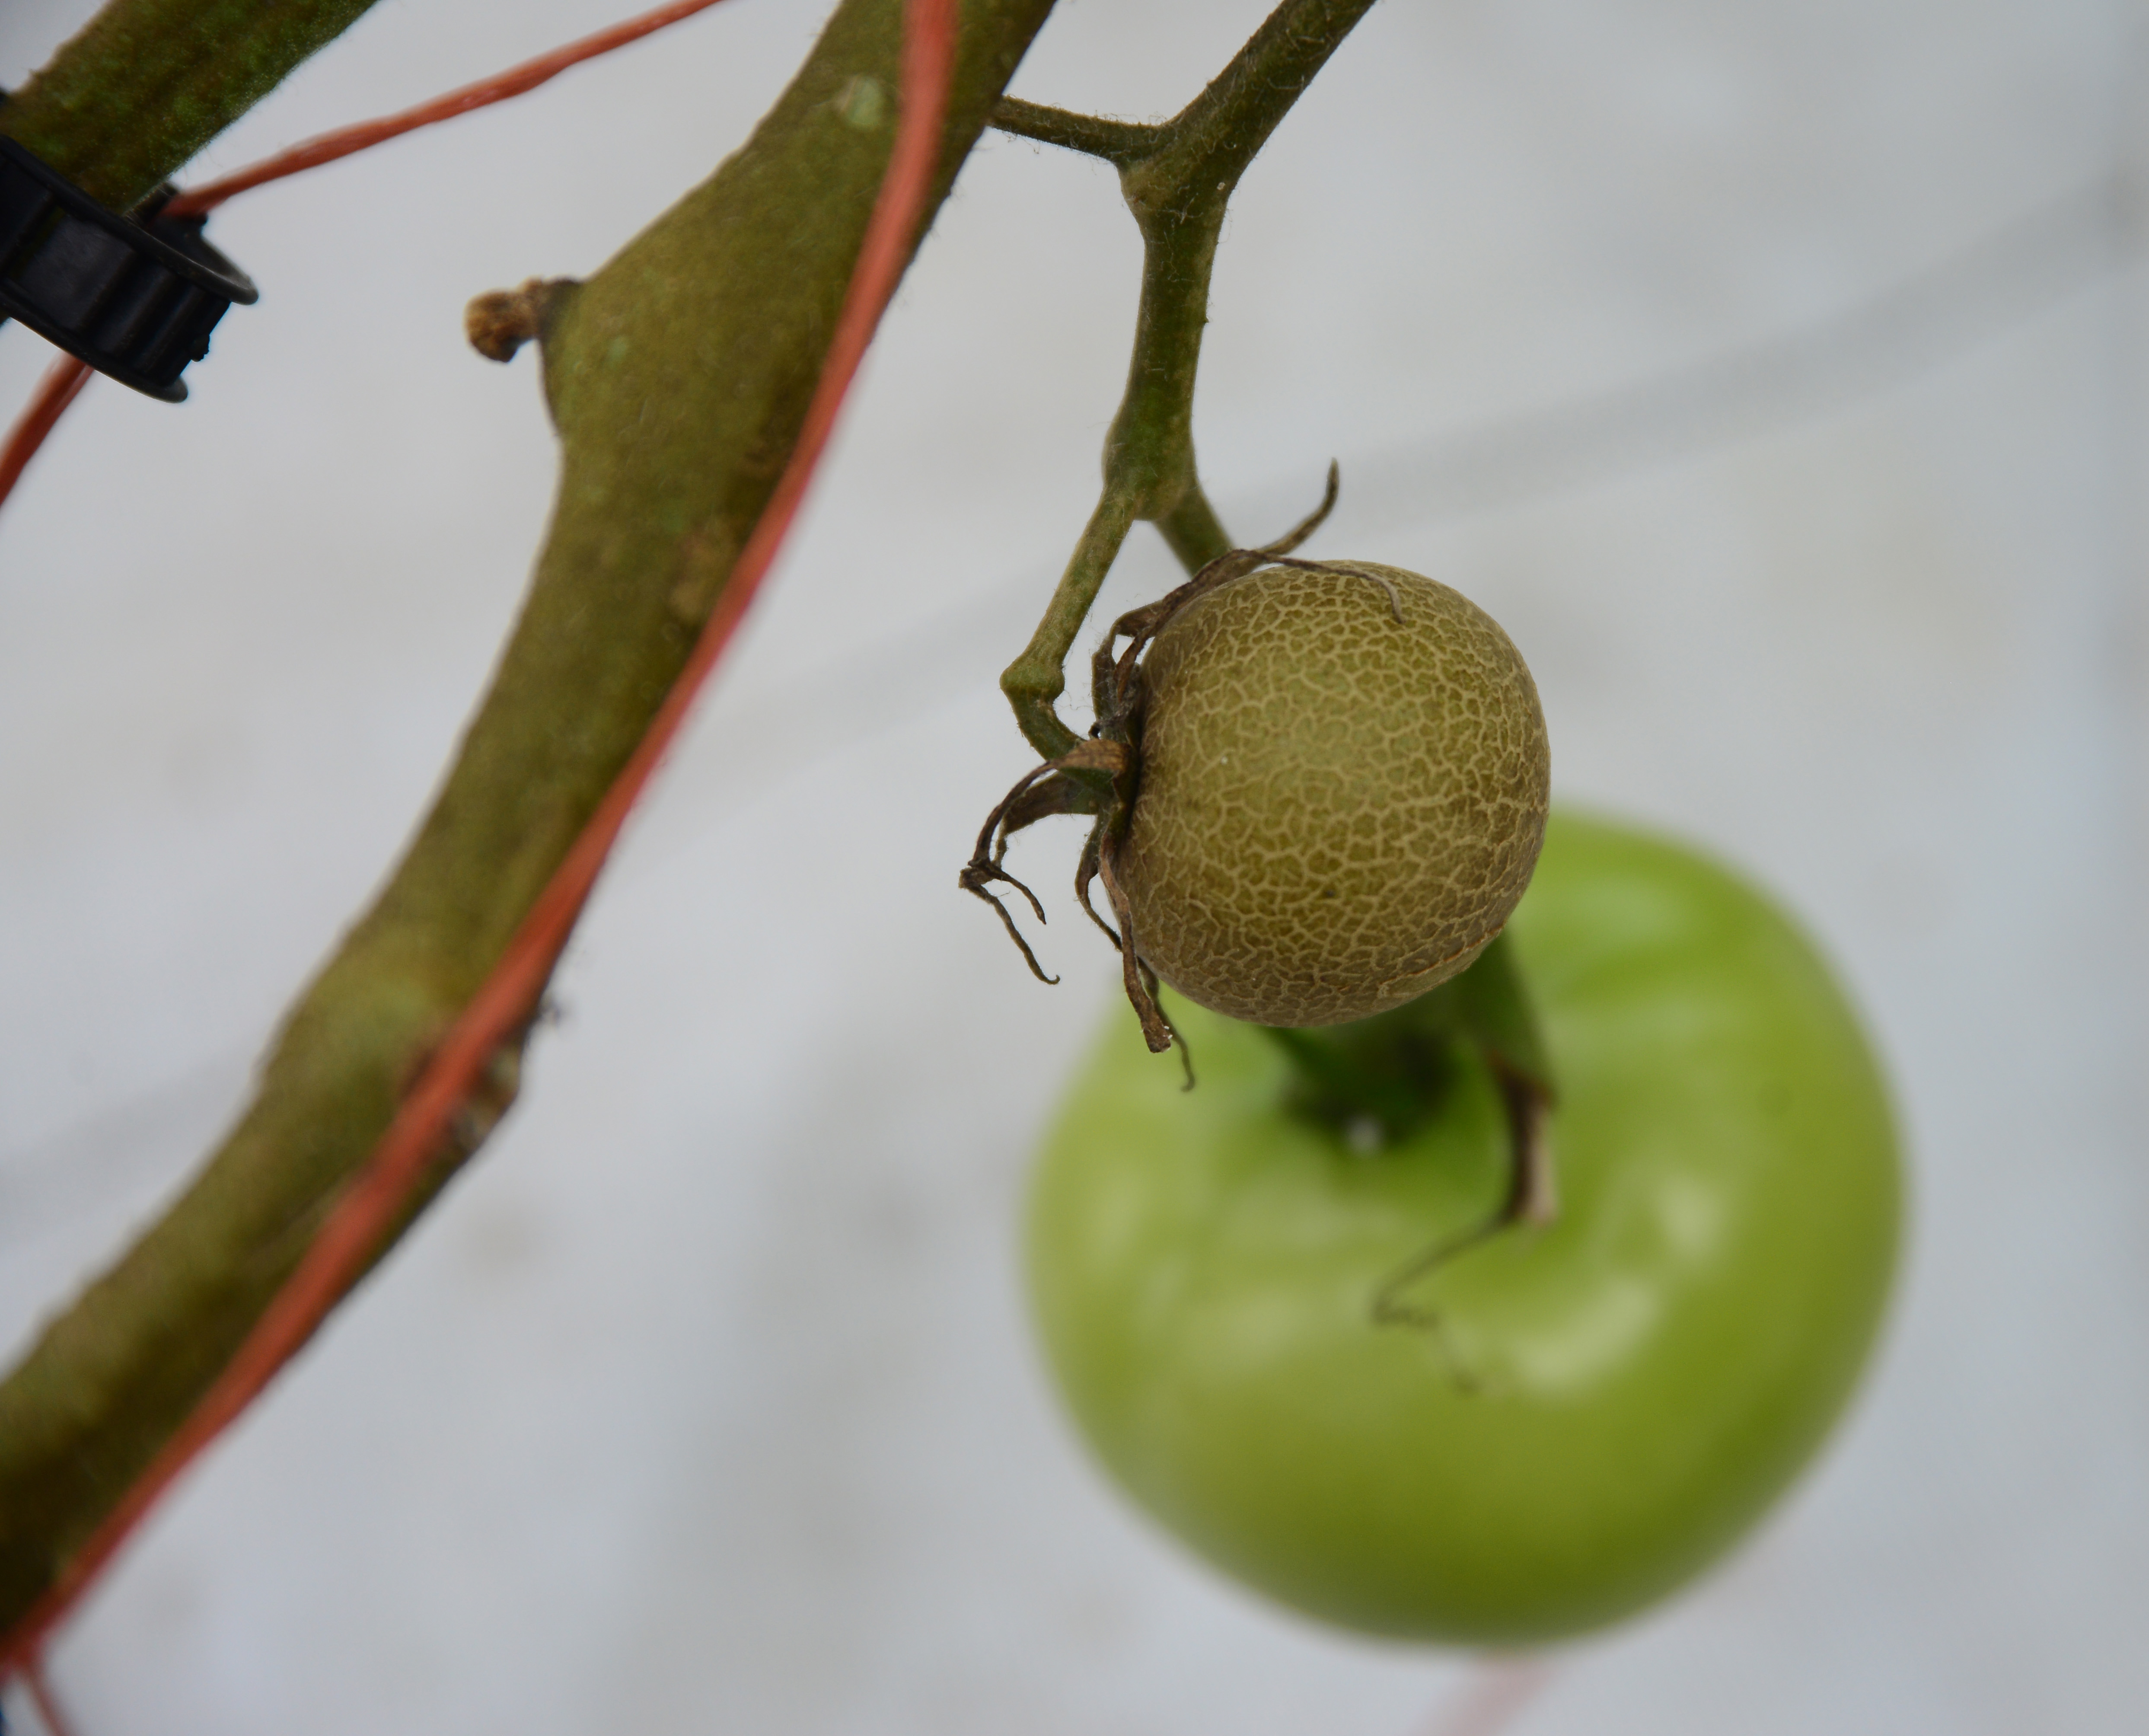 Undersized, dark, russetted fruit from tomato russet mites.